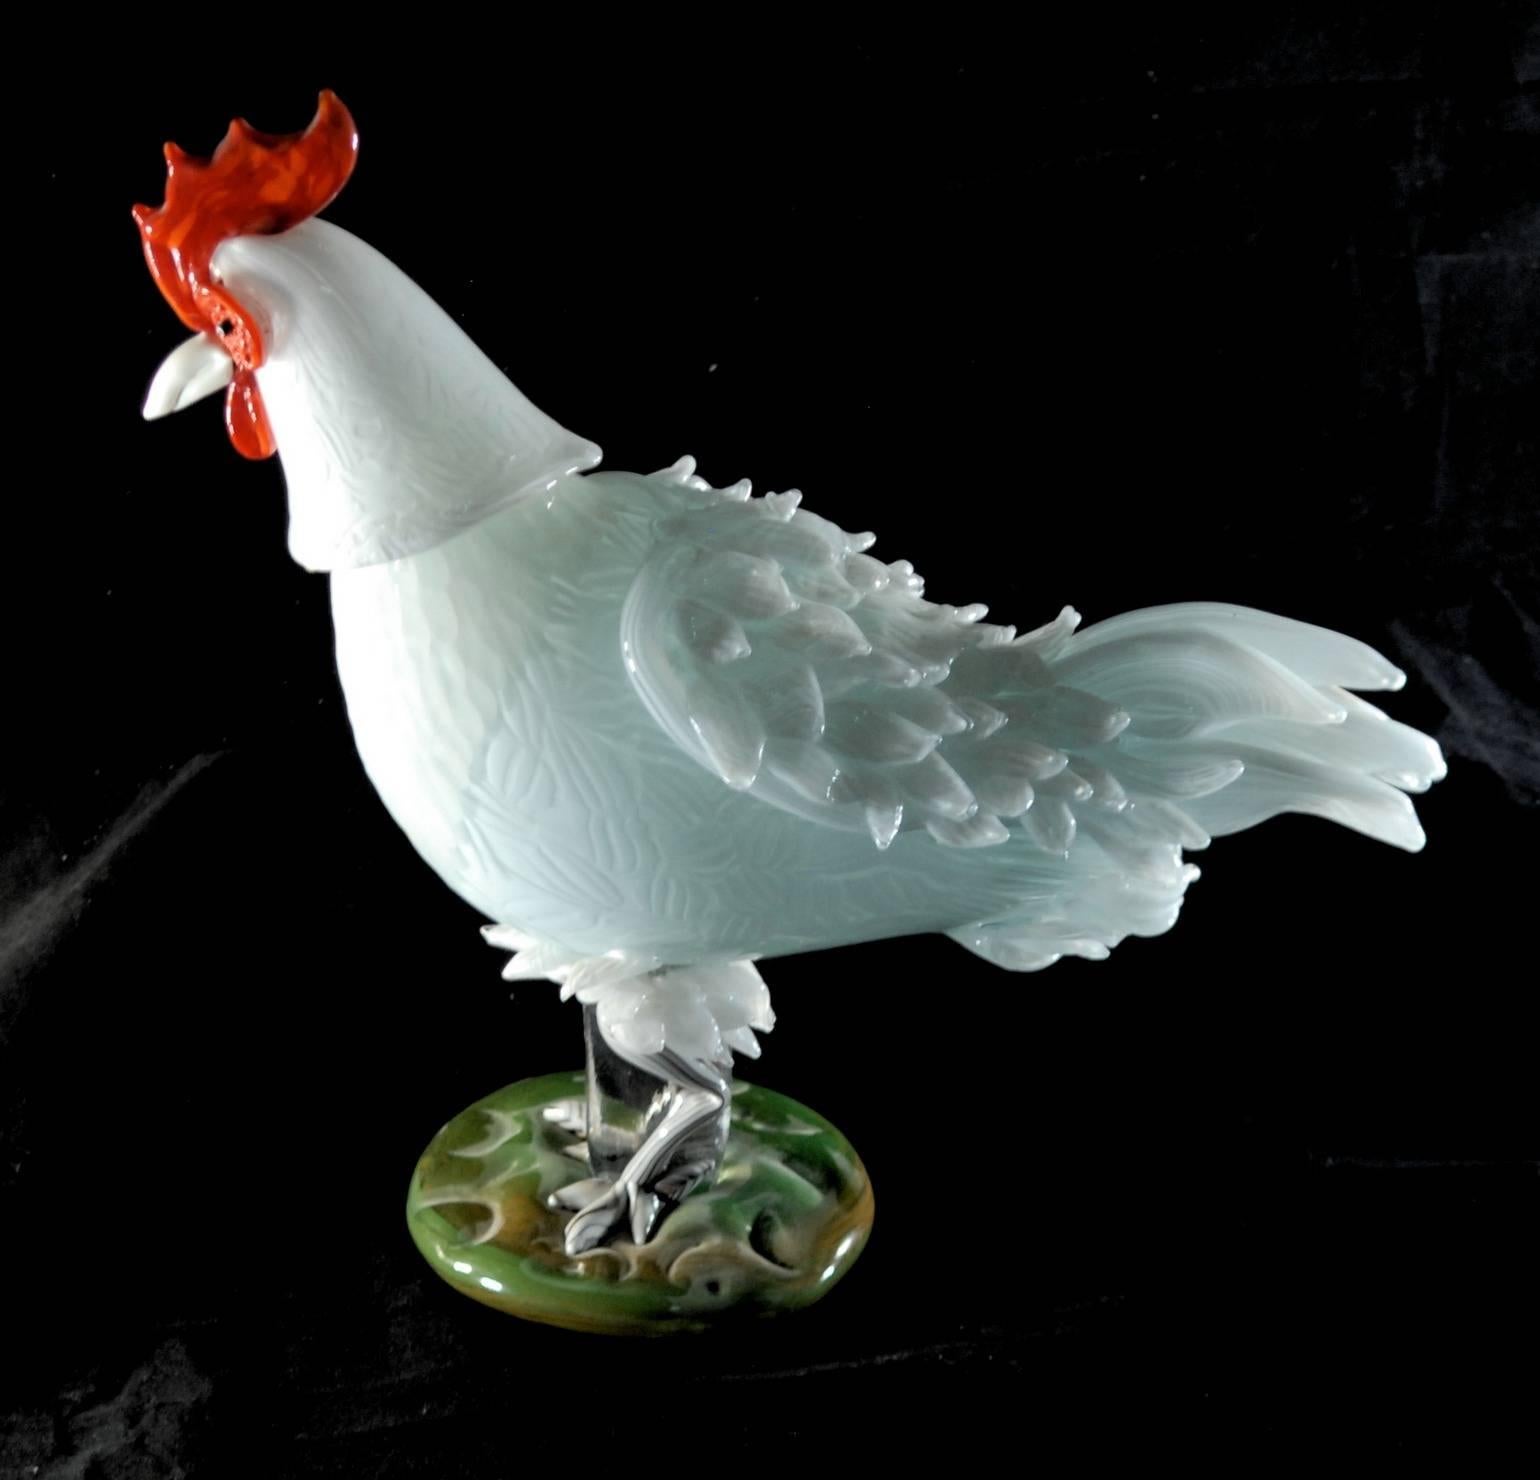 A couple of murrina glass hens with coral glass details, a Murano masterpiece. These highly detailed birds from the 50s are a highly sought-after pieces for collectors. Extremely rare, especially considering that this is a pair. I knew about Toni